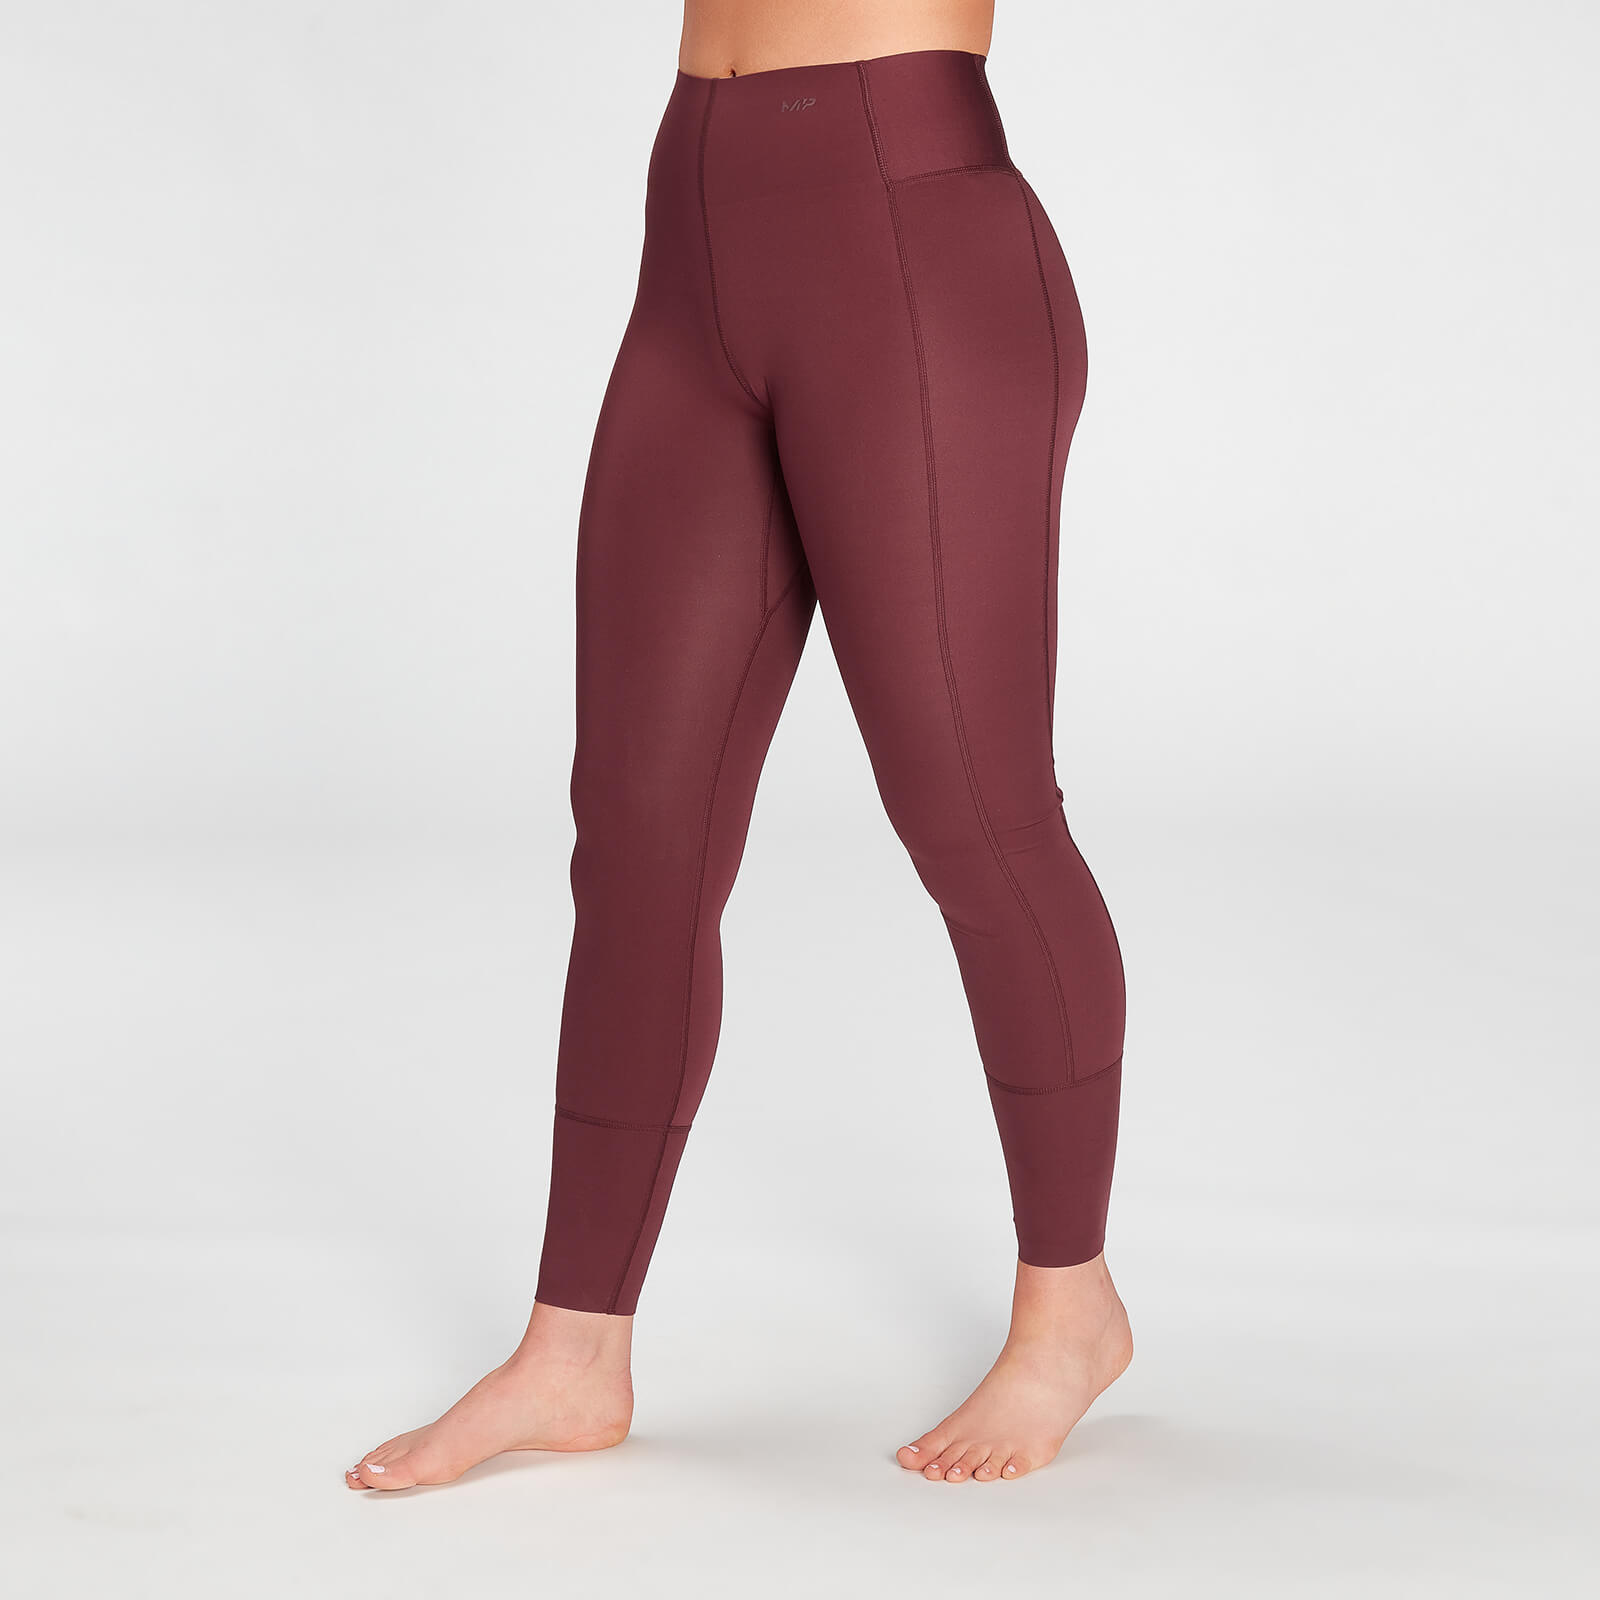 MP Women's Composure Leggings- Washed Oxblood - S